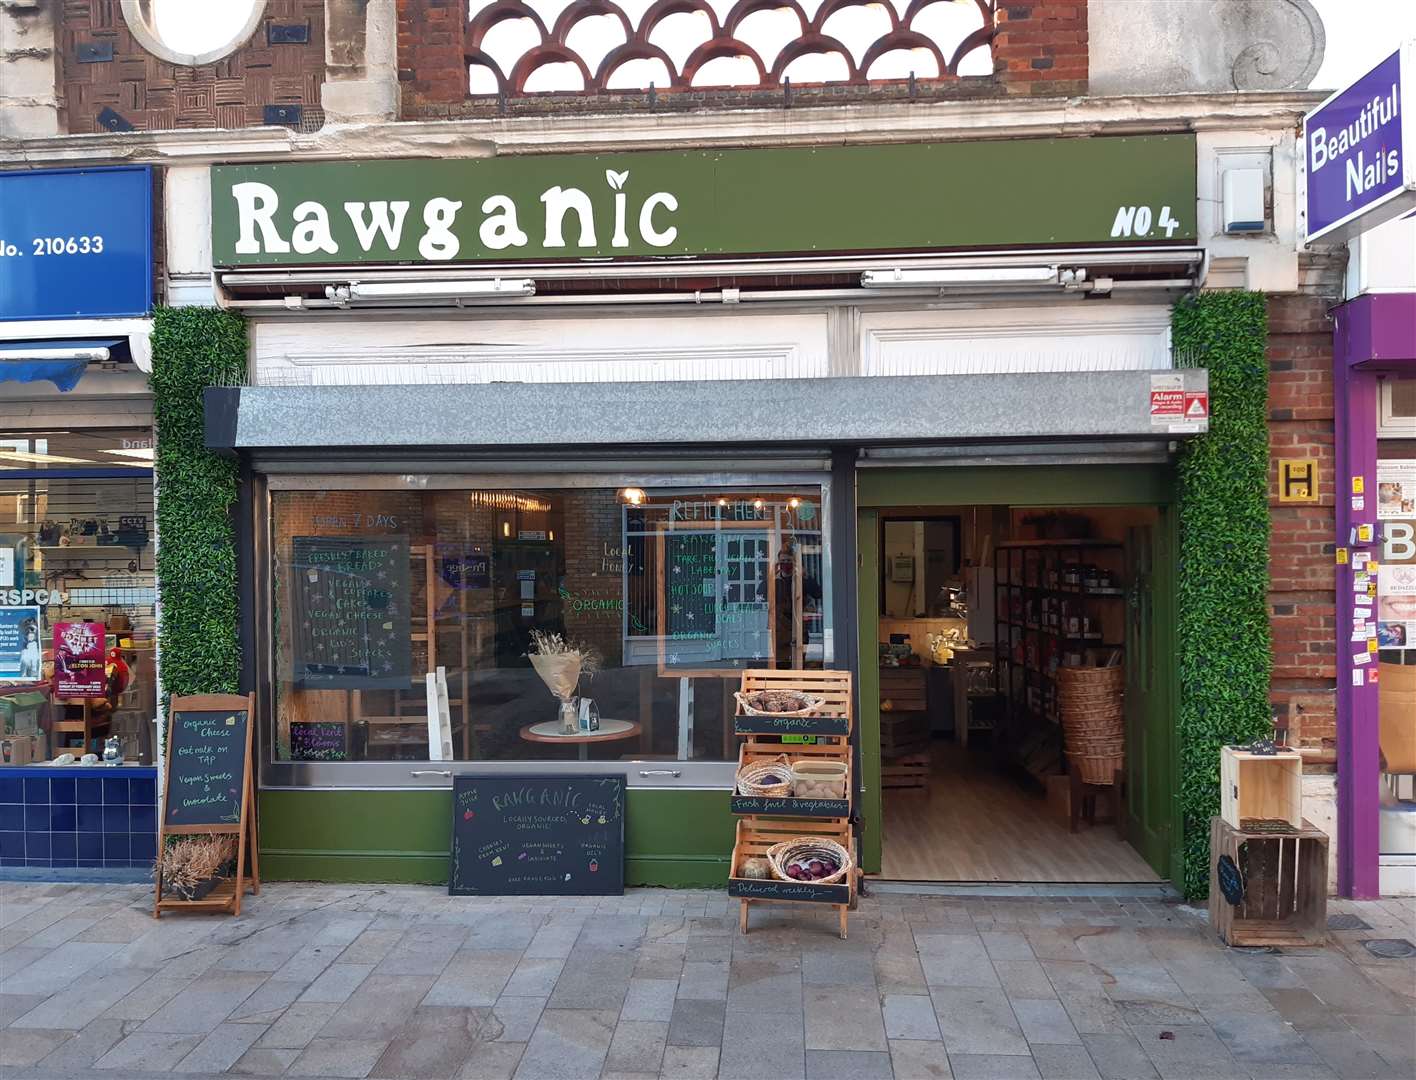 Eco-friendly Dartford business Rawganic has announced it is closing down after struggling with the cost of living and supplier increases.